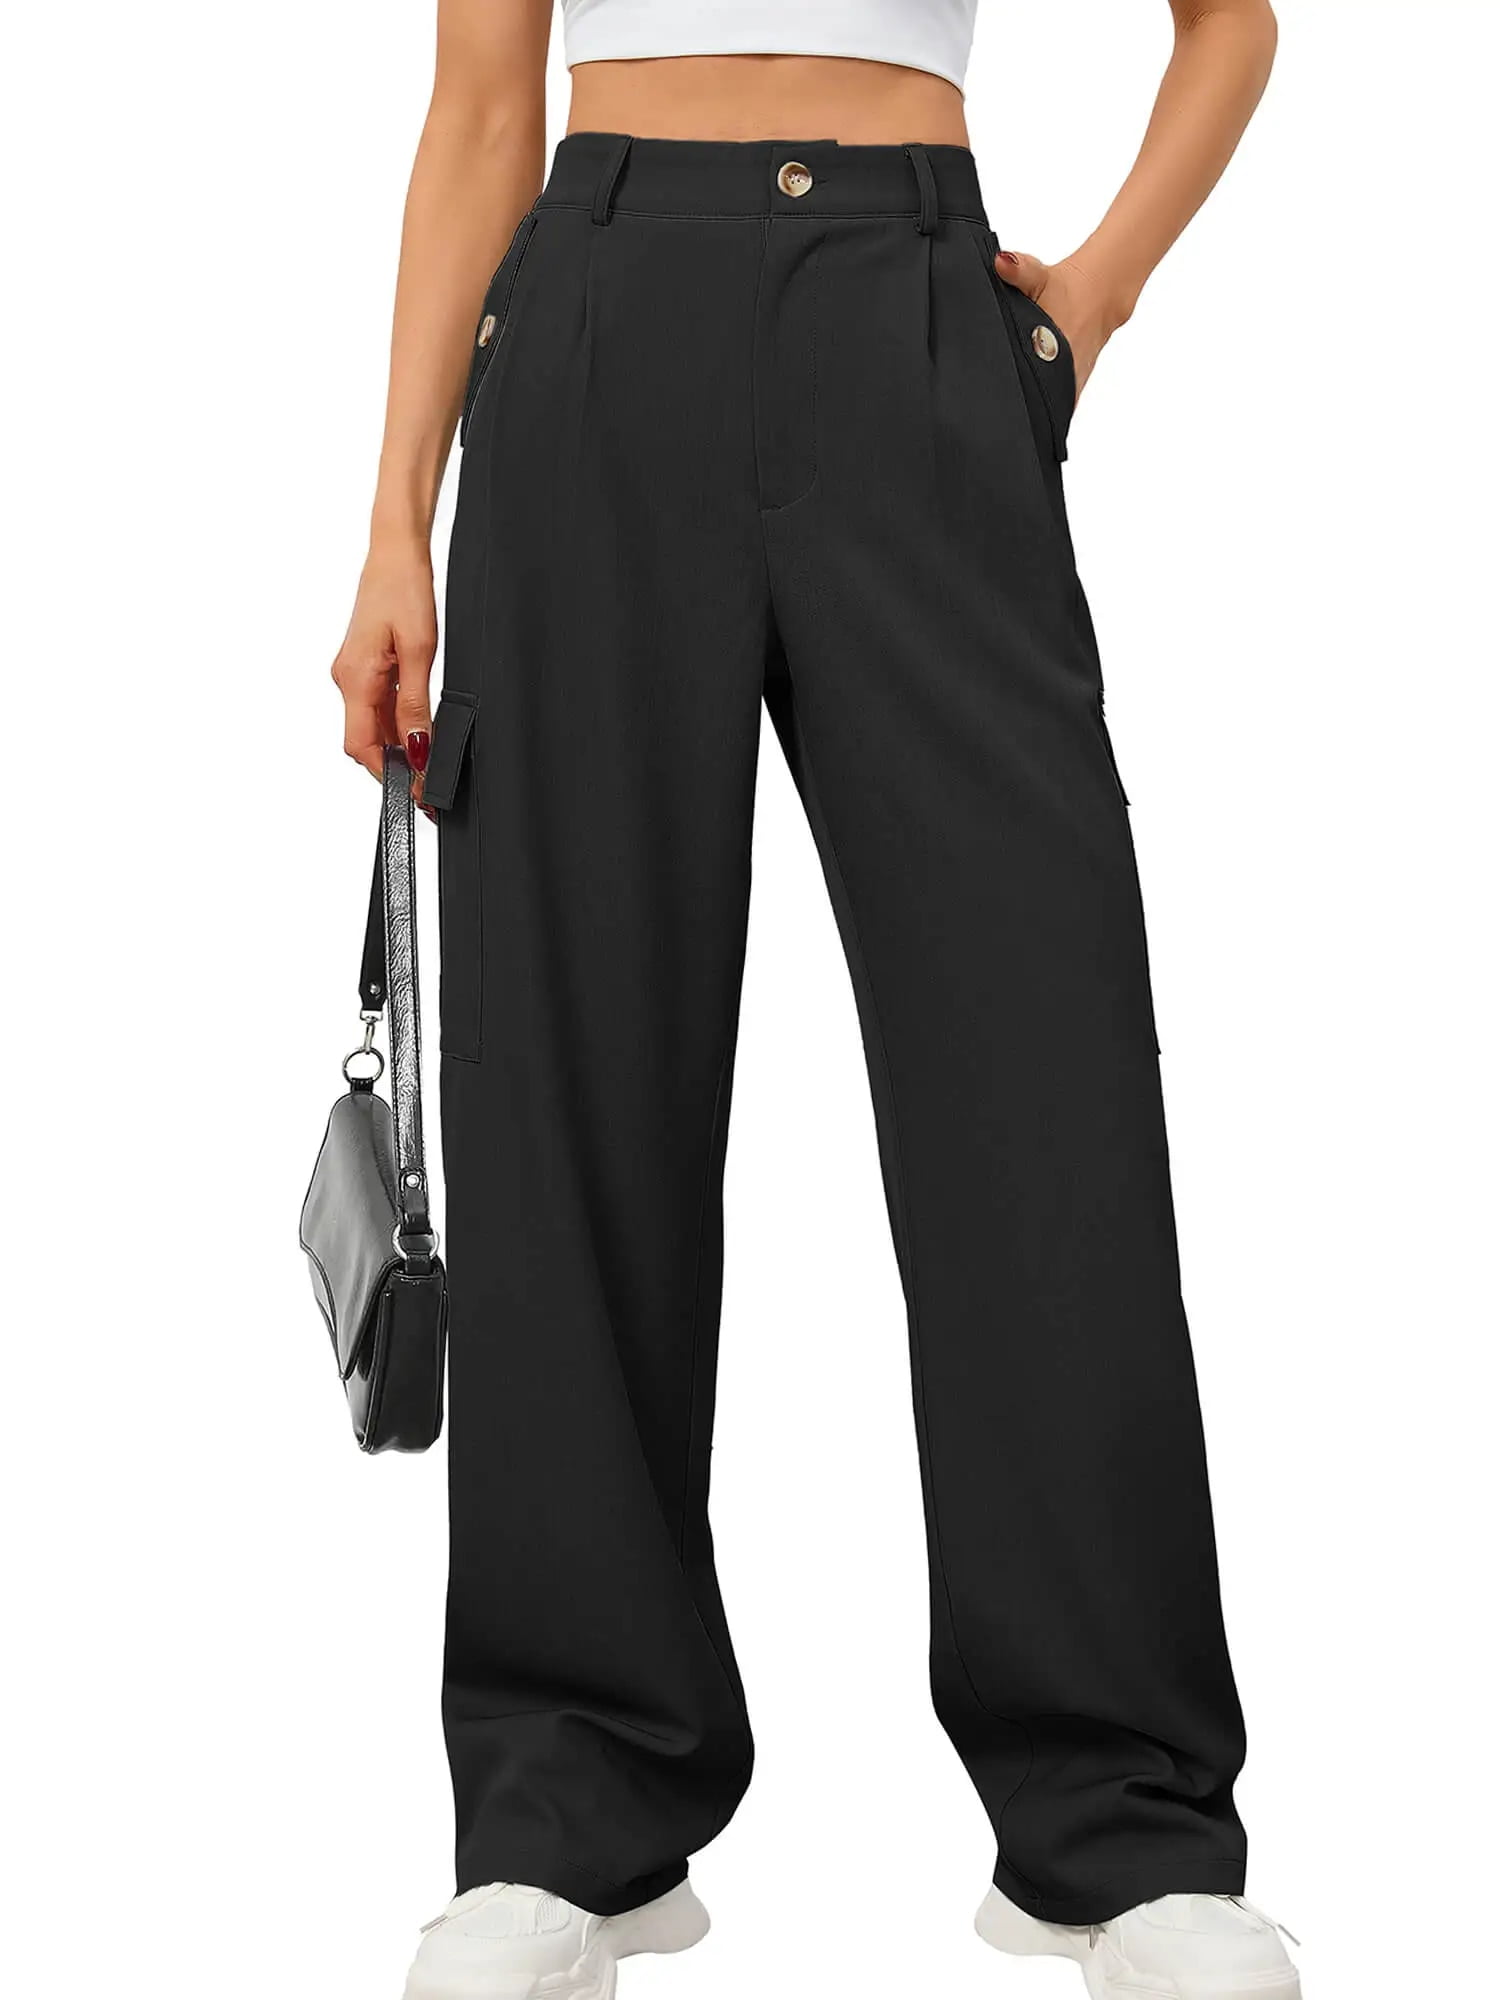 Chiclily Women Wide Leg Lounge Pants Black M Work Business Casual Loose ...